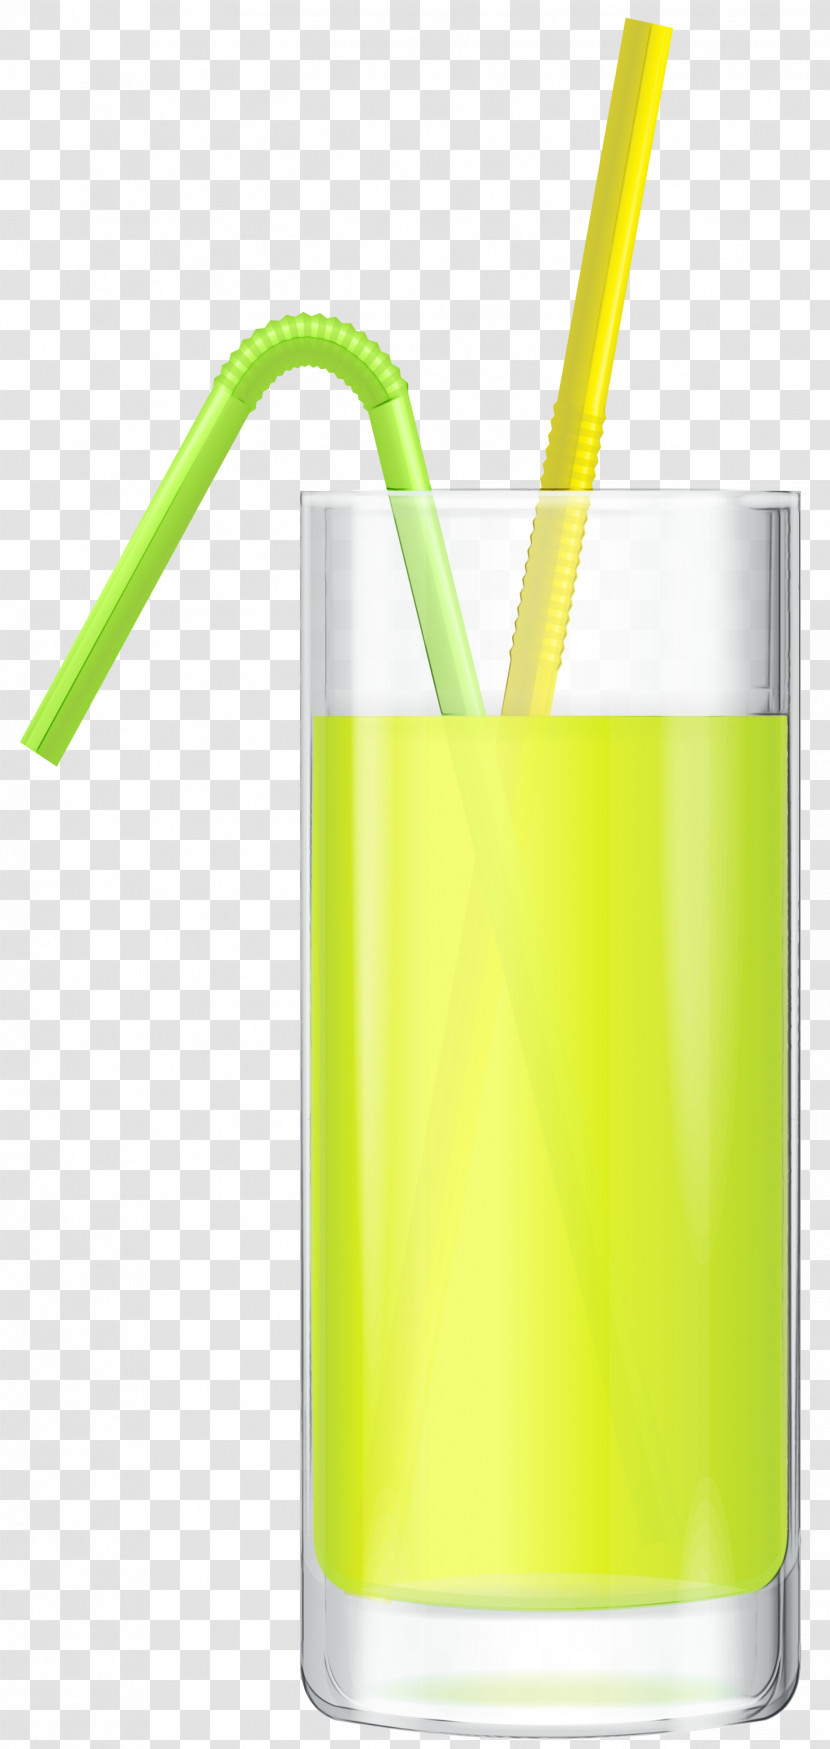 Drinking Straw Yellow Drink Straw Party Supply Transparent PNG